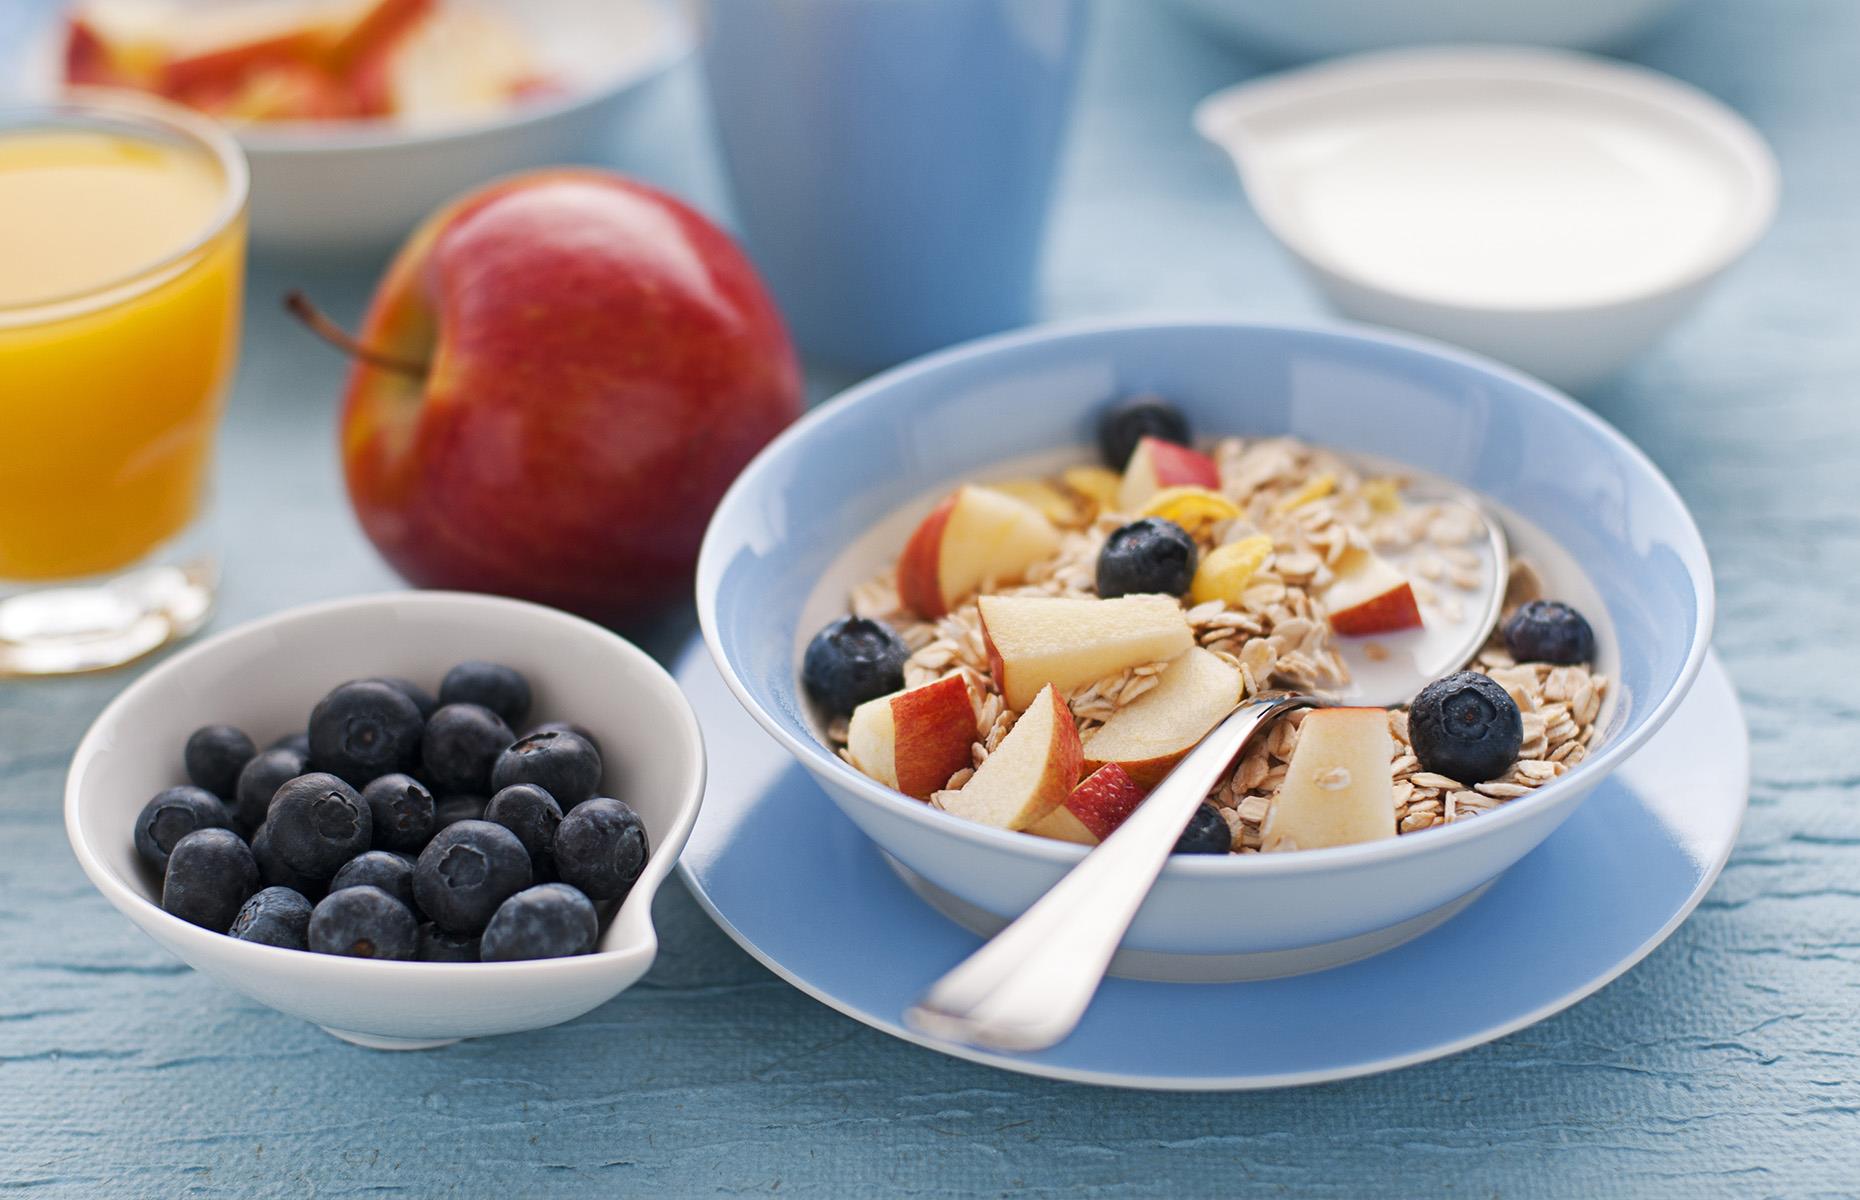 <p>We get it; mornings can be hectically busy. But if there's no place in your pre-work schedule for a nutritious breakfast, you're really missing a trick. Eating breakfast gives you a boost of energy to help you take on the day – and if you skip it, you're more likely to overeat later on. If you're really pressed for time, make sure you stock up on yogurt and fruits, which you easily can take with you, or try making yourself a healthy smoothie. </p>